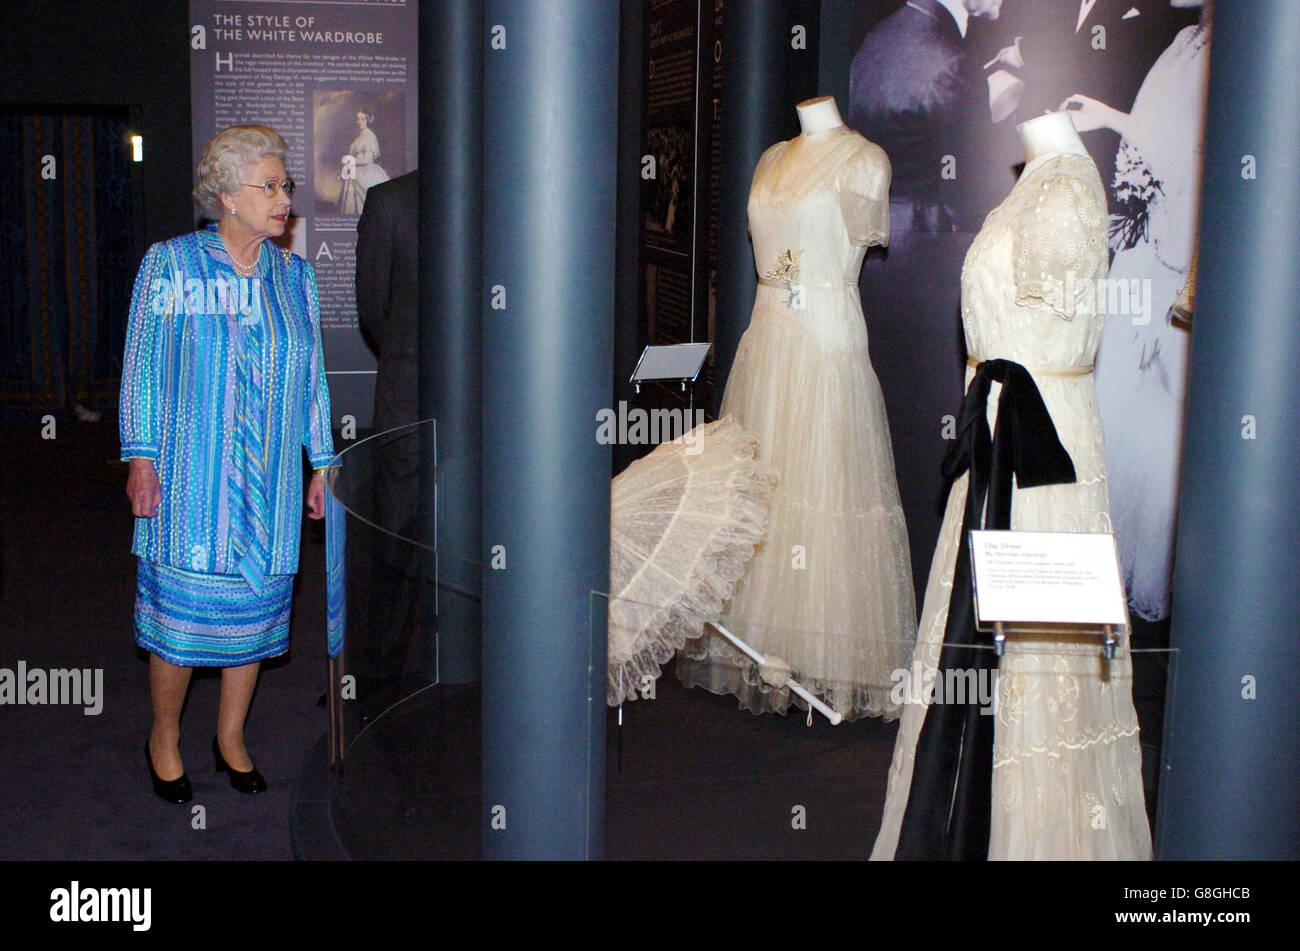 Britain's Queen Elizabeth II looks at her mother, Queen Elizabeth's 'White Wardrobe' which forms part of the special exhibition for the summer opening of Buckingham Palace, inside the Palace in central London. The exhibition will open to the public this Saturday on July 30. Stock Photo